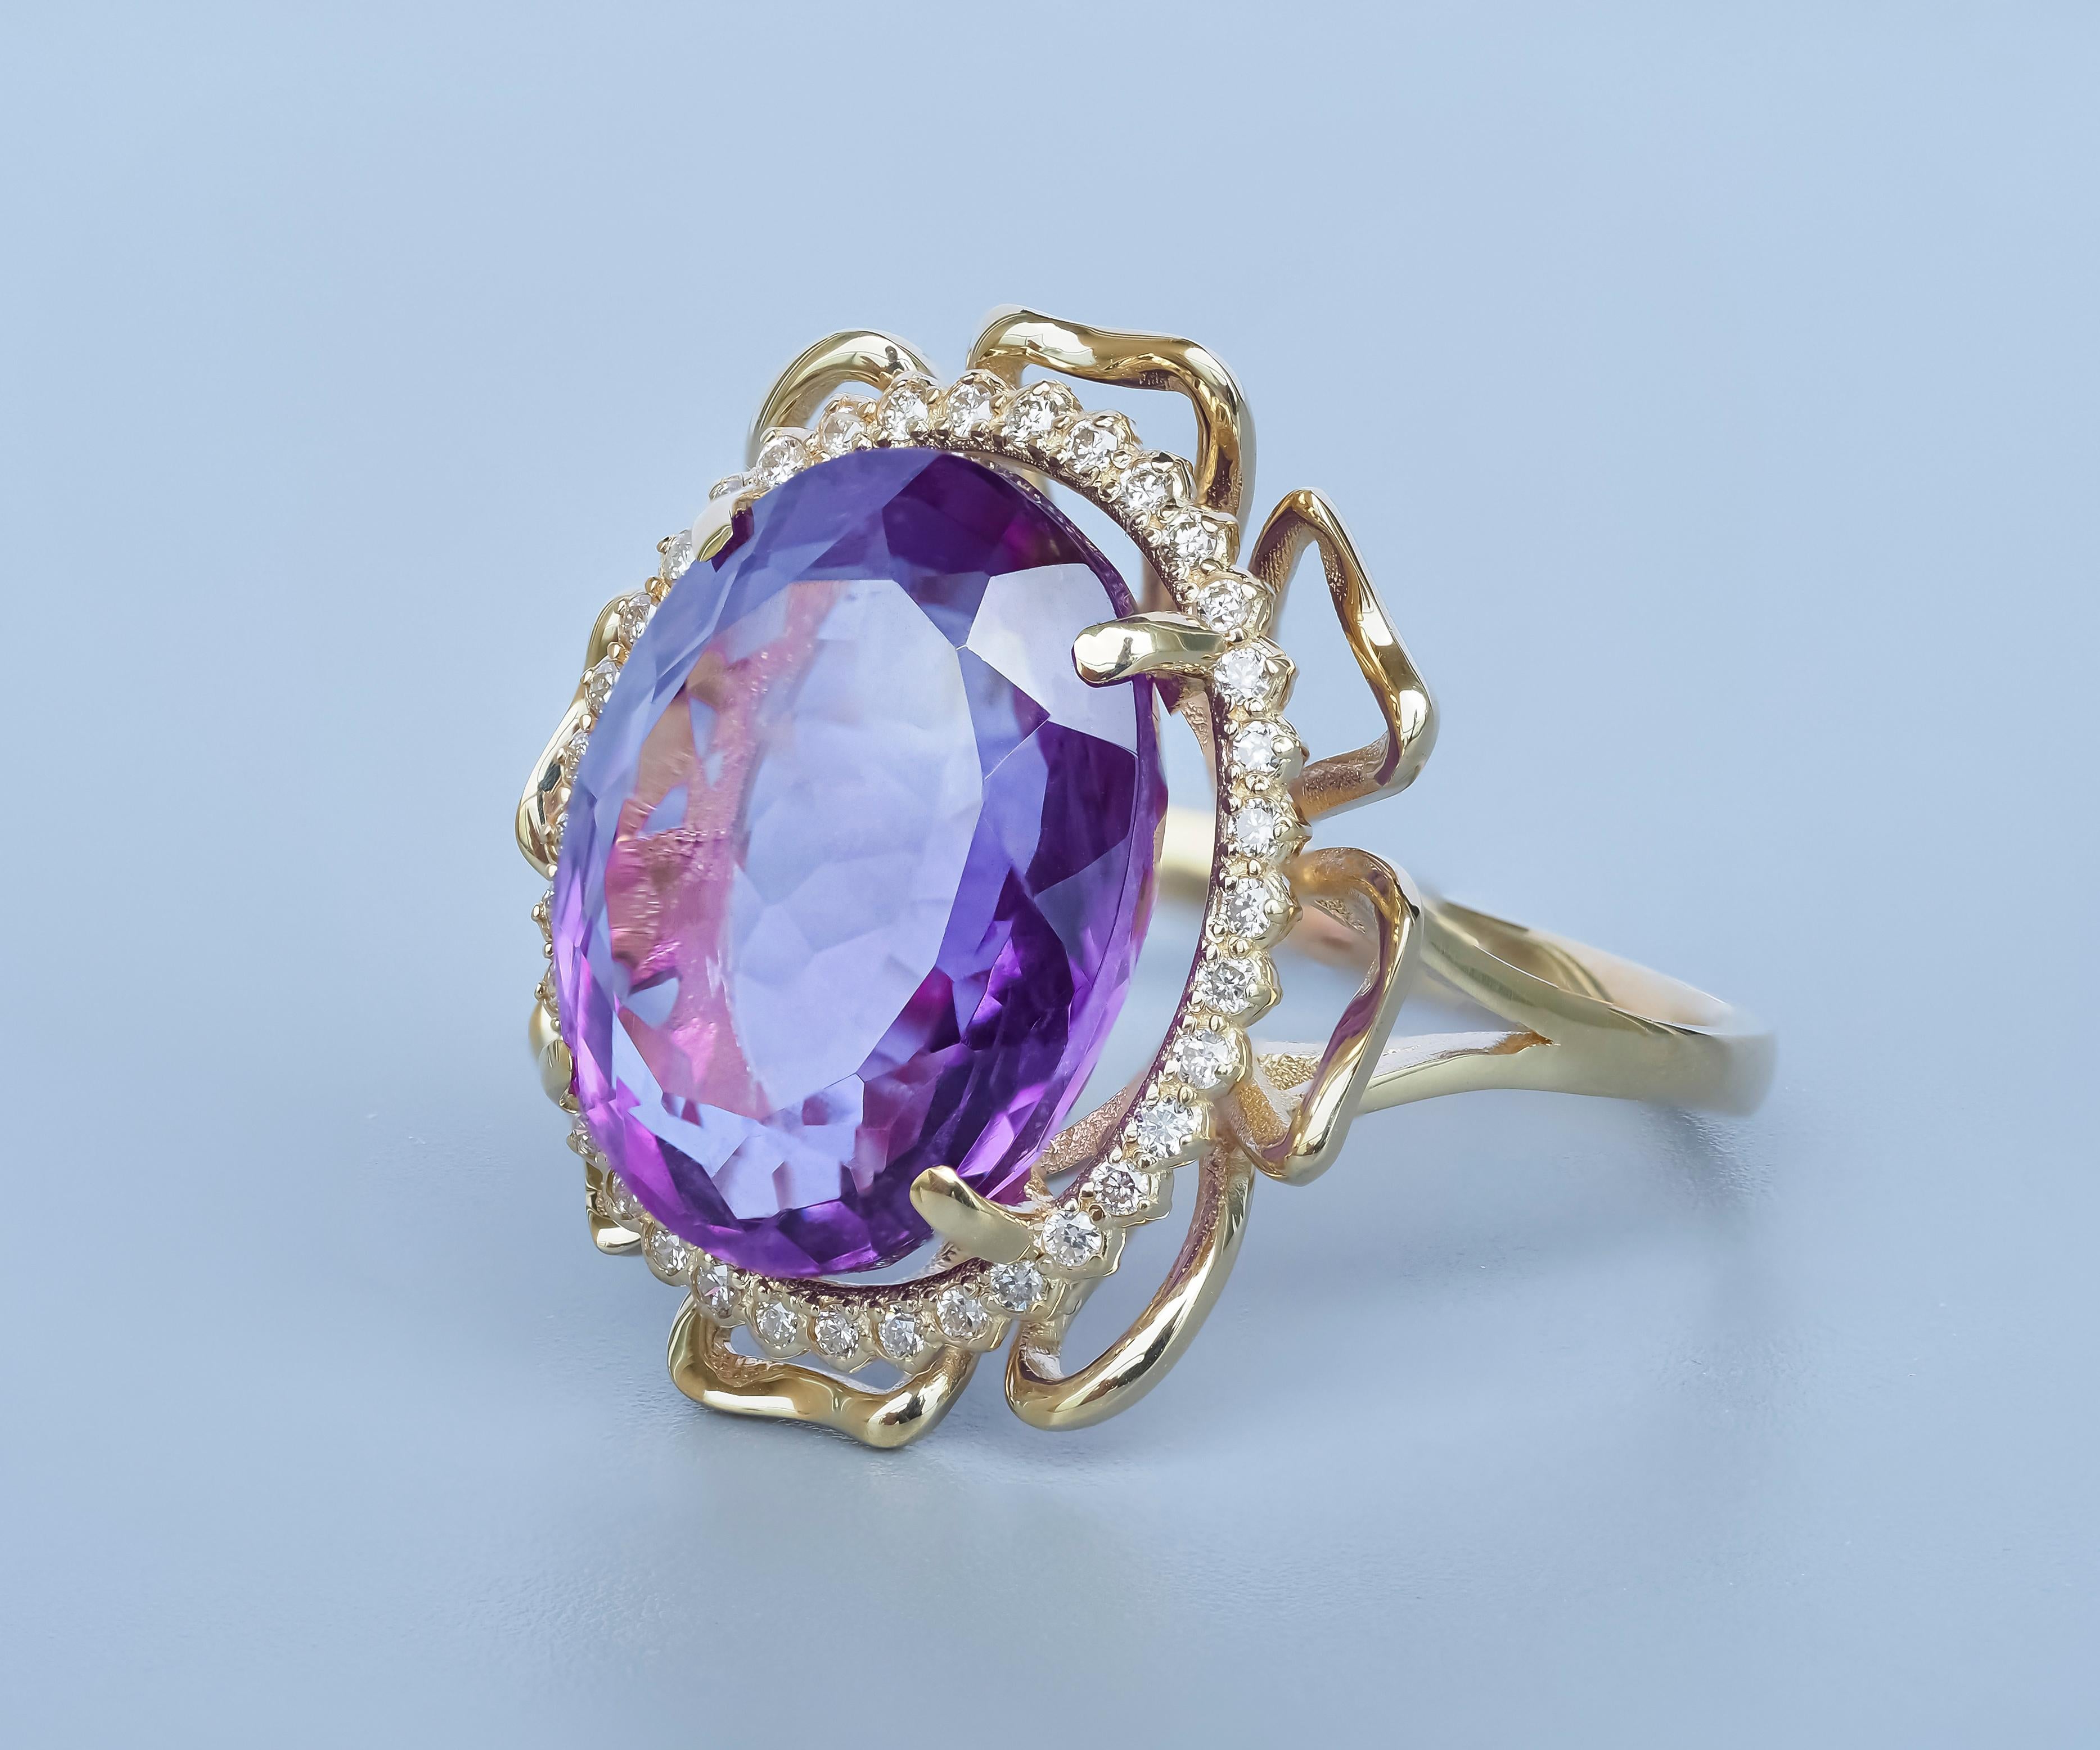 For Sale:  14 Karat Gold Flower Ring with Amethyst and Diamonds 2